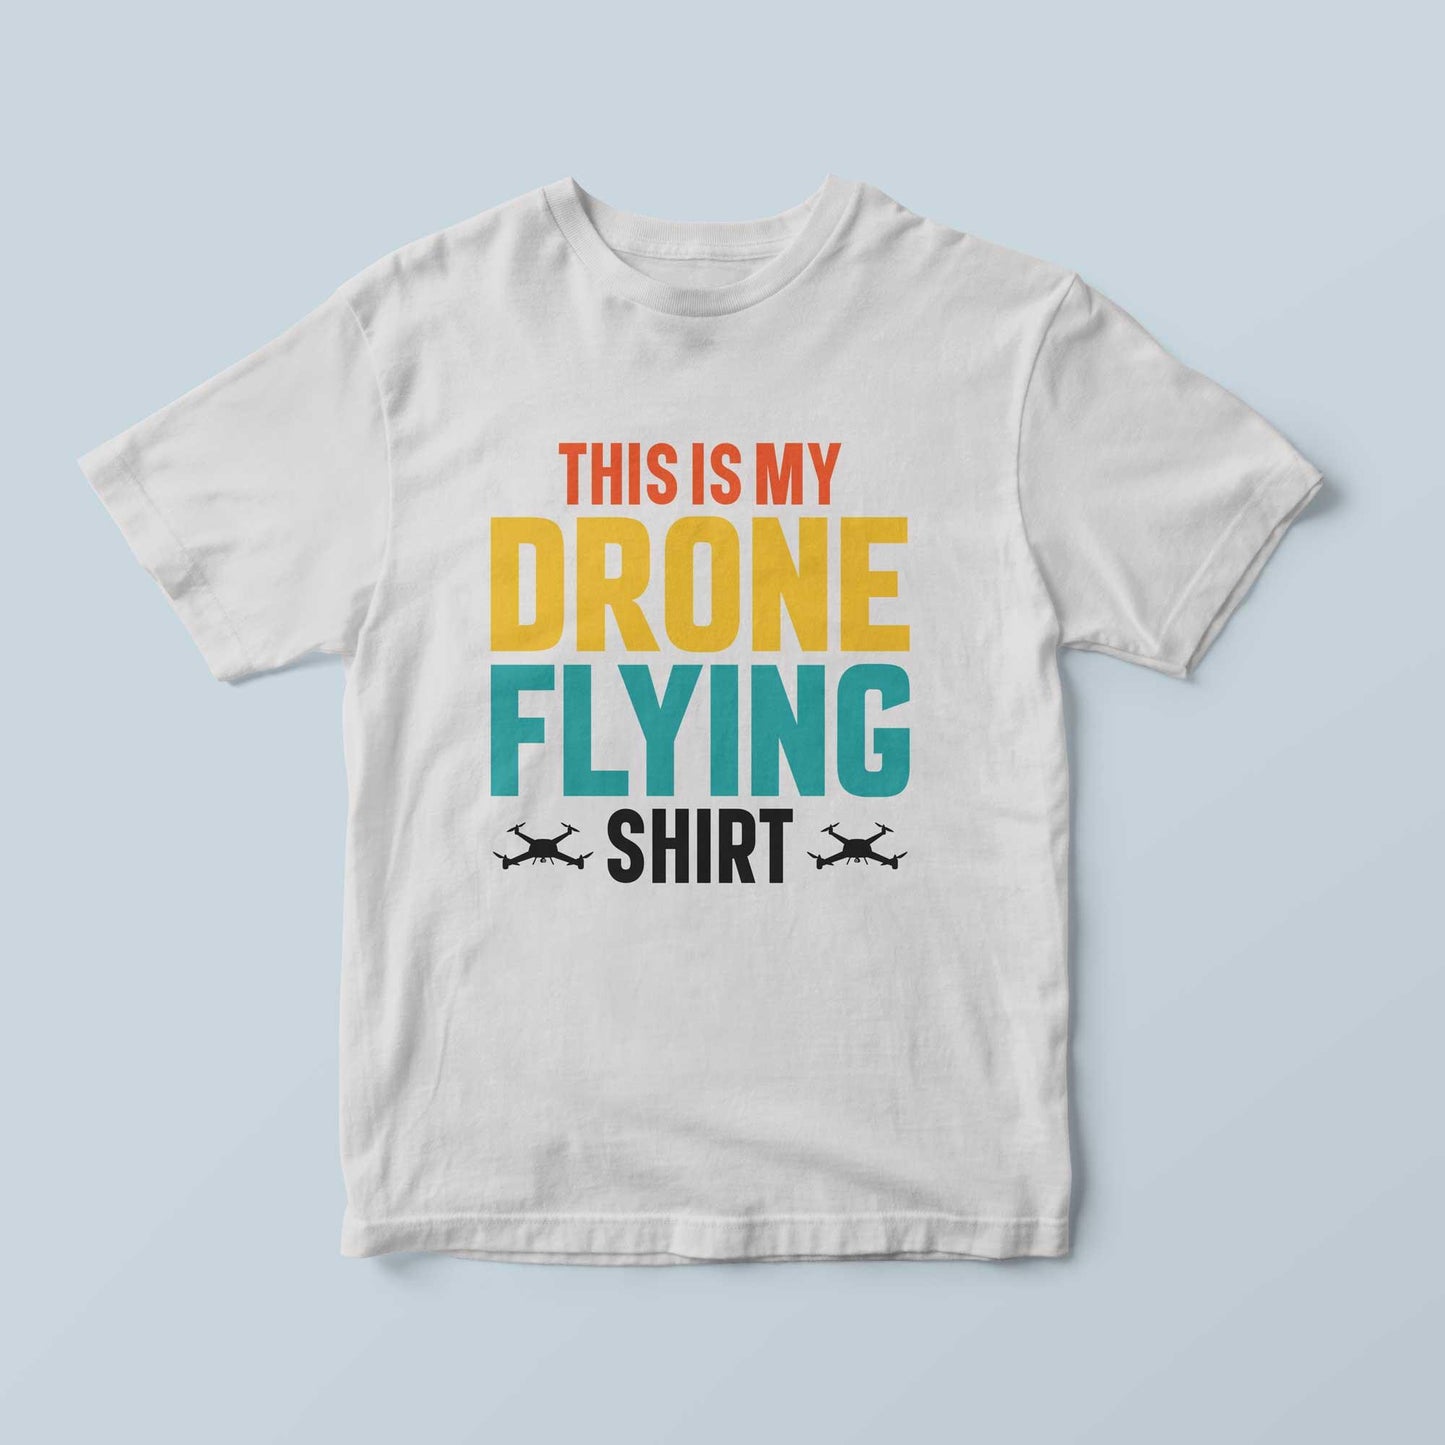 T-SHIRT THIS IS MY DRONE FLYING - Andrea Pinotti Official